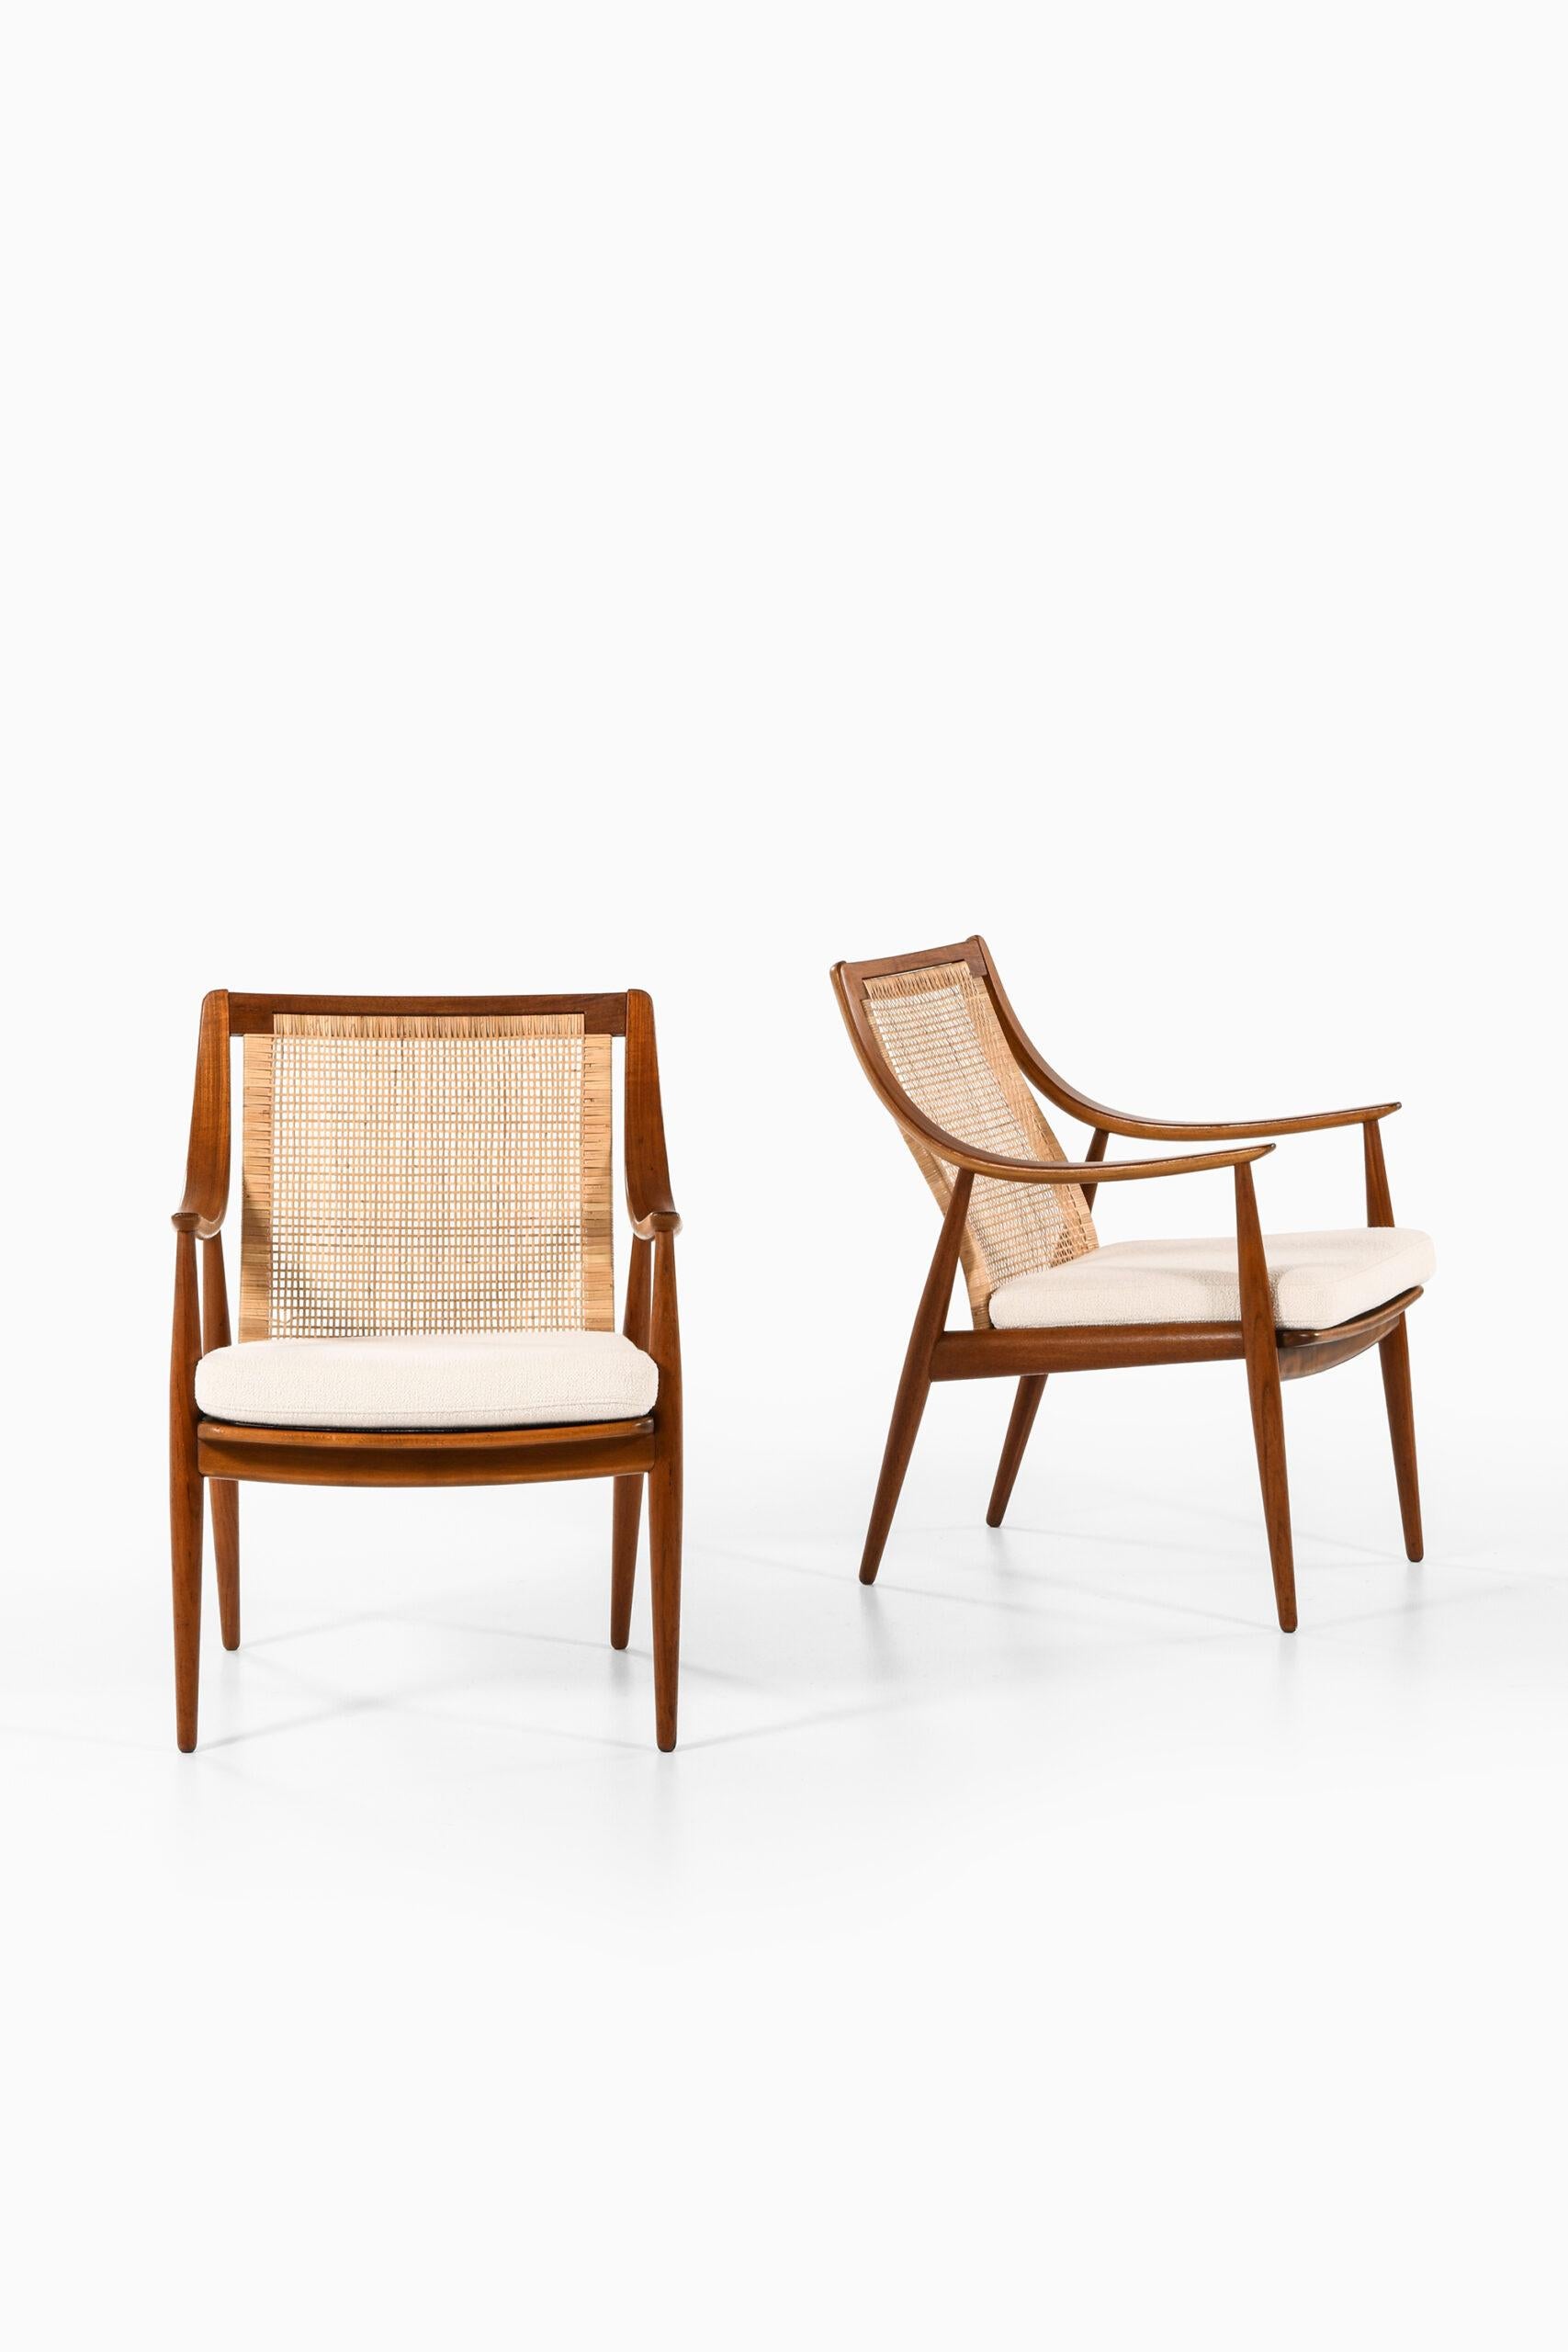 Rare pair of easy chairs model 146 designed by Peter Hvidt & Orla Mølgaard-Nielsen. Produced by France & Son in Denmark.